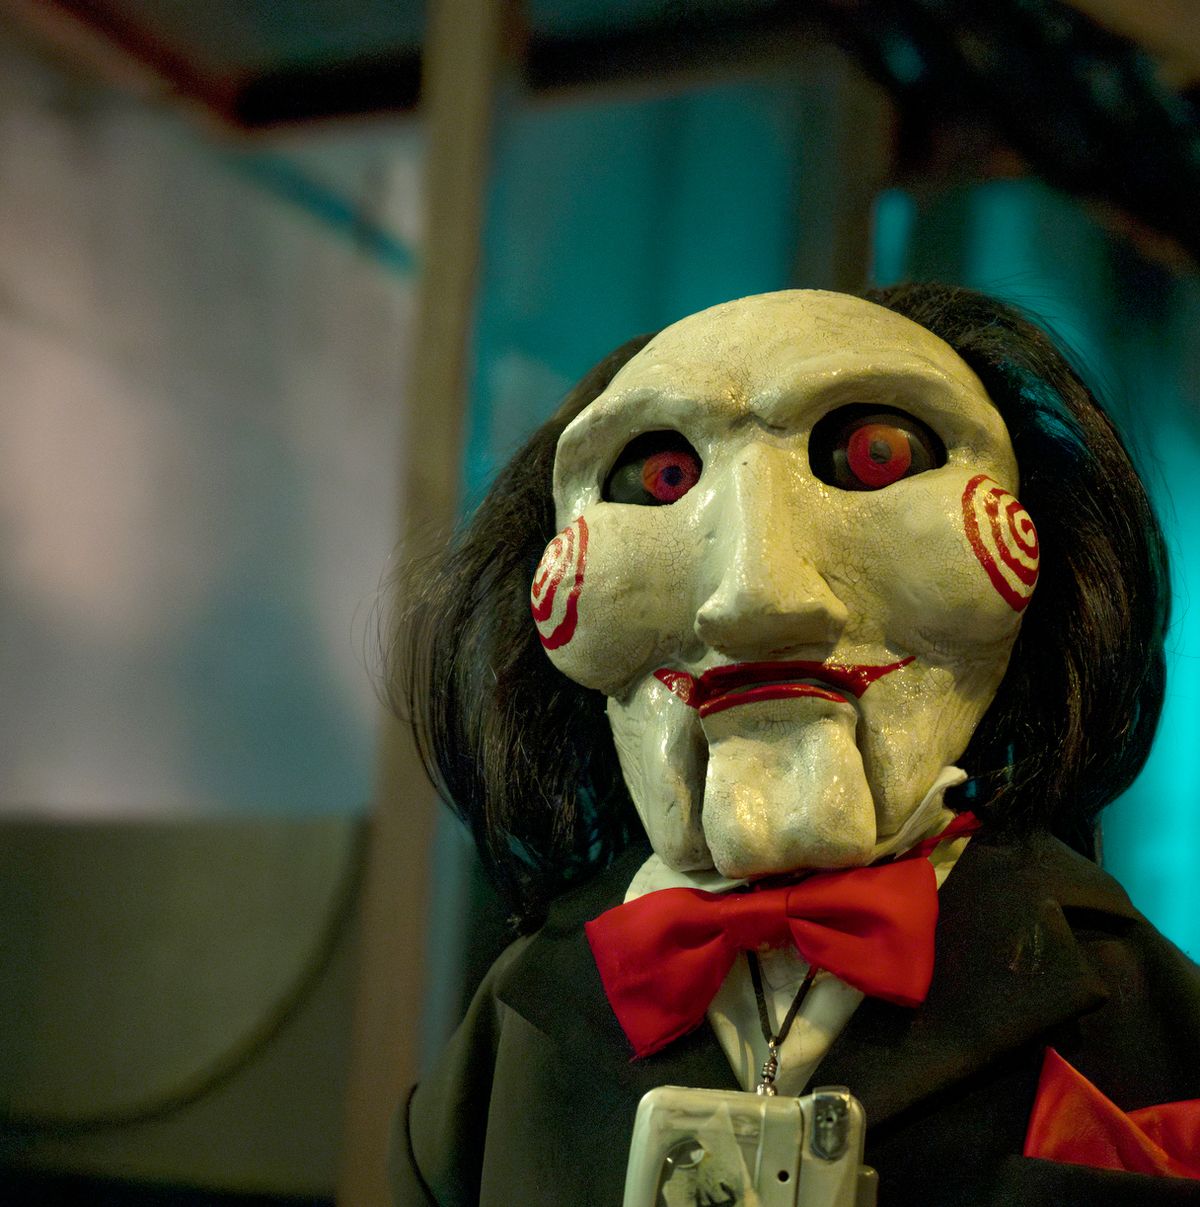 Things get personal for Jigsaw in the official trailer for Saw X